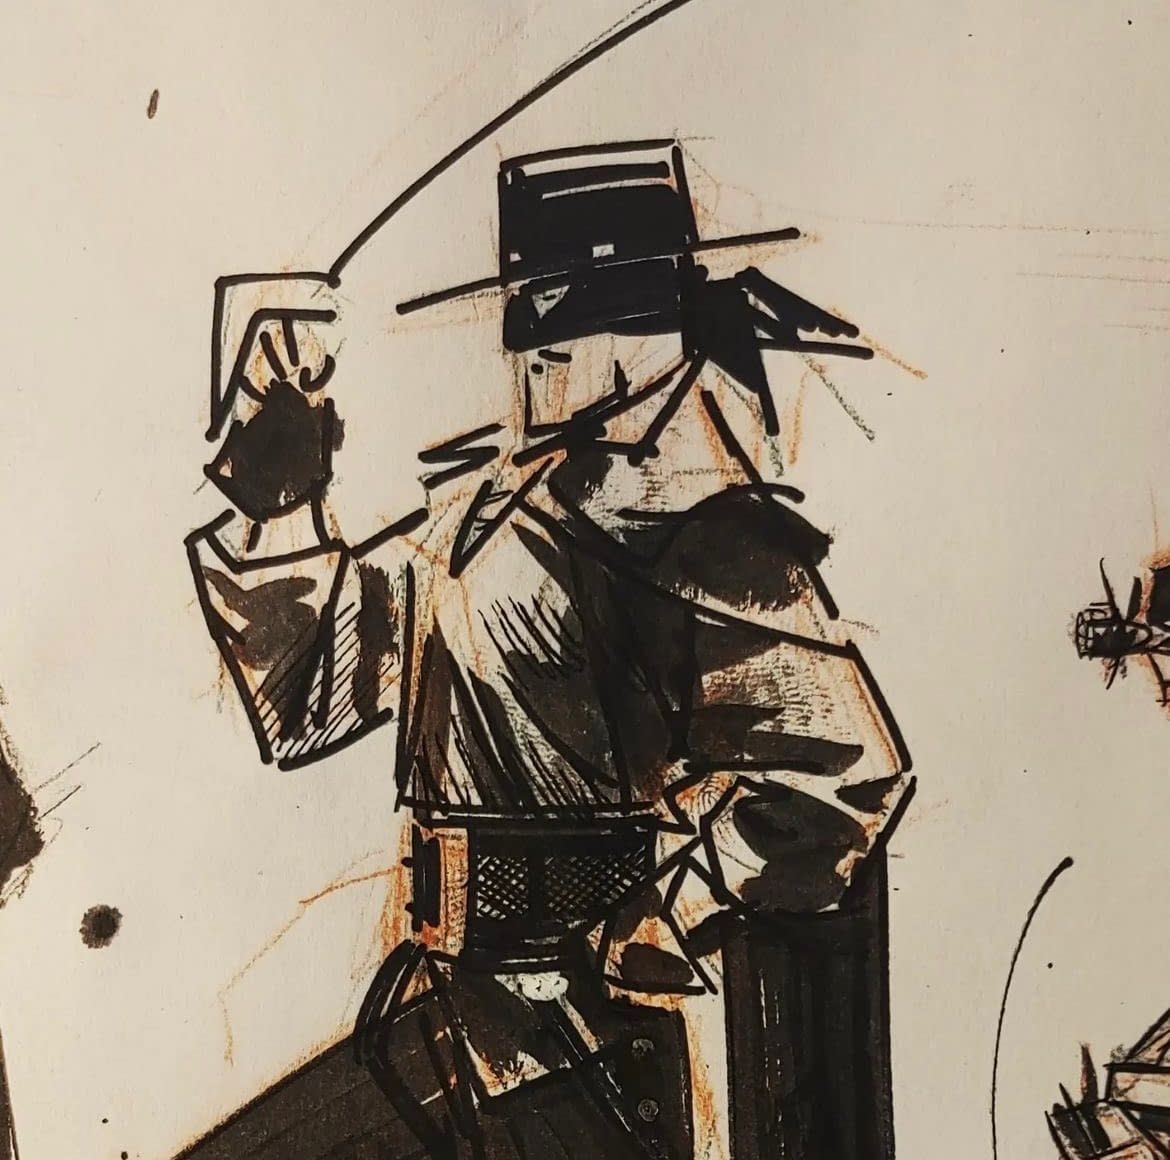 Sean Murphy Buys Rights To Zorro For His Own Comic, Man Of The Dead